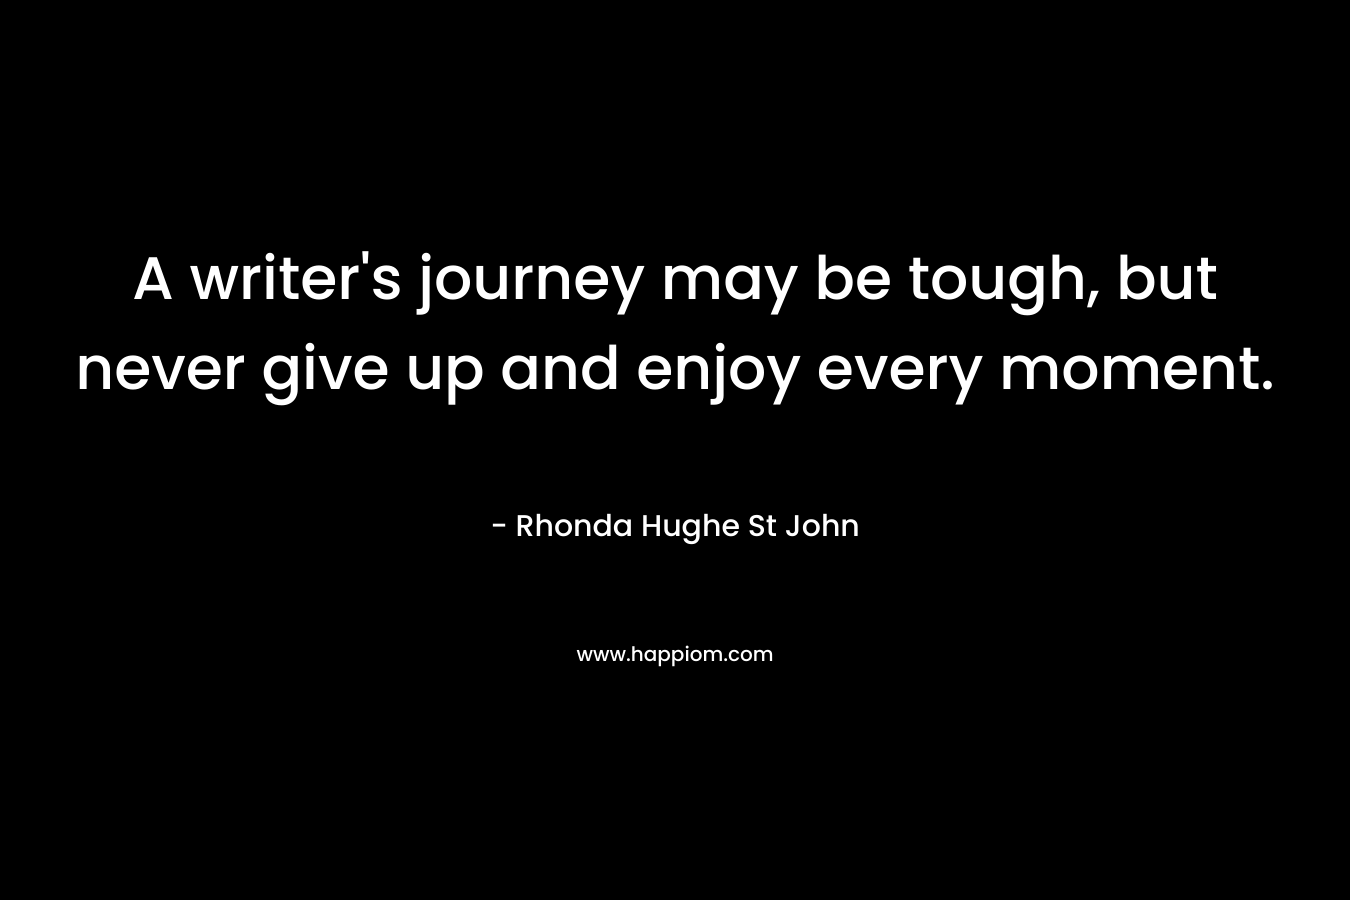 A writer’s journey may be tough, but never give up and enjoy every moment. – Rhonda Hughe St John